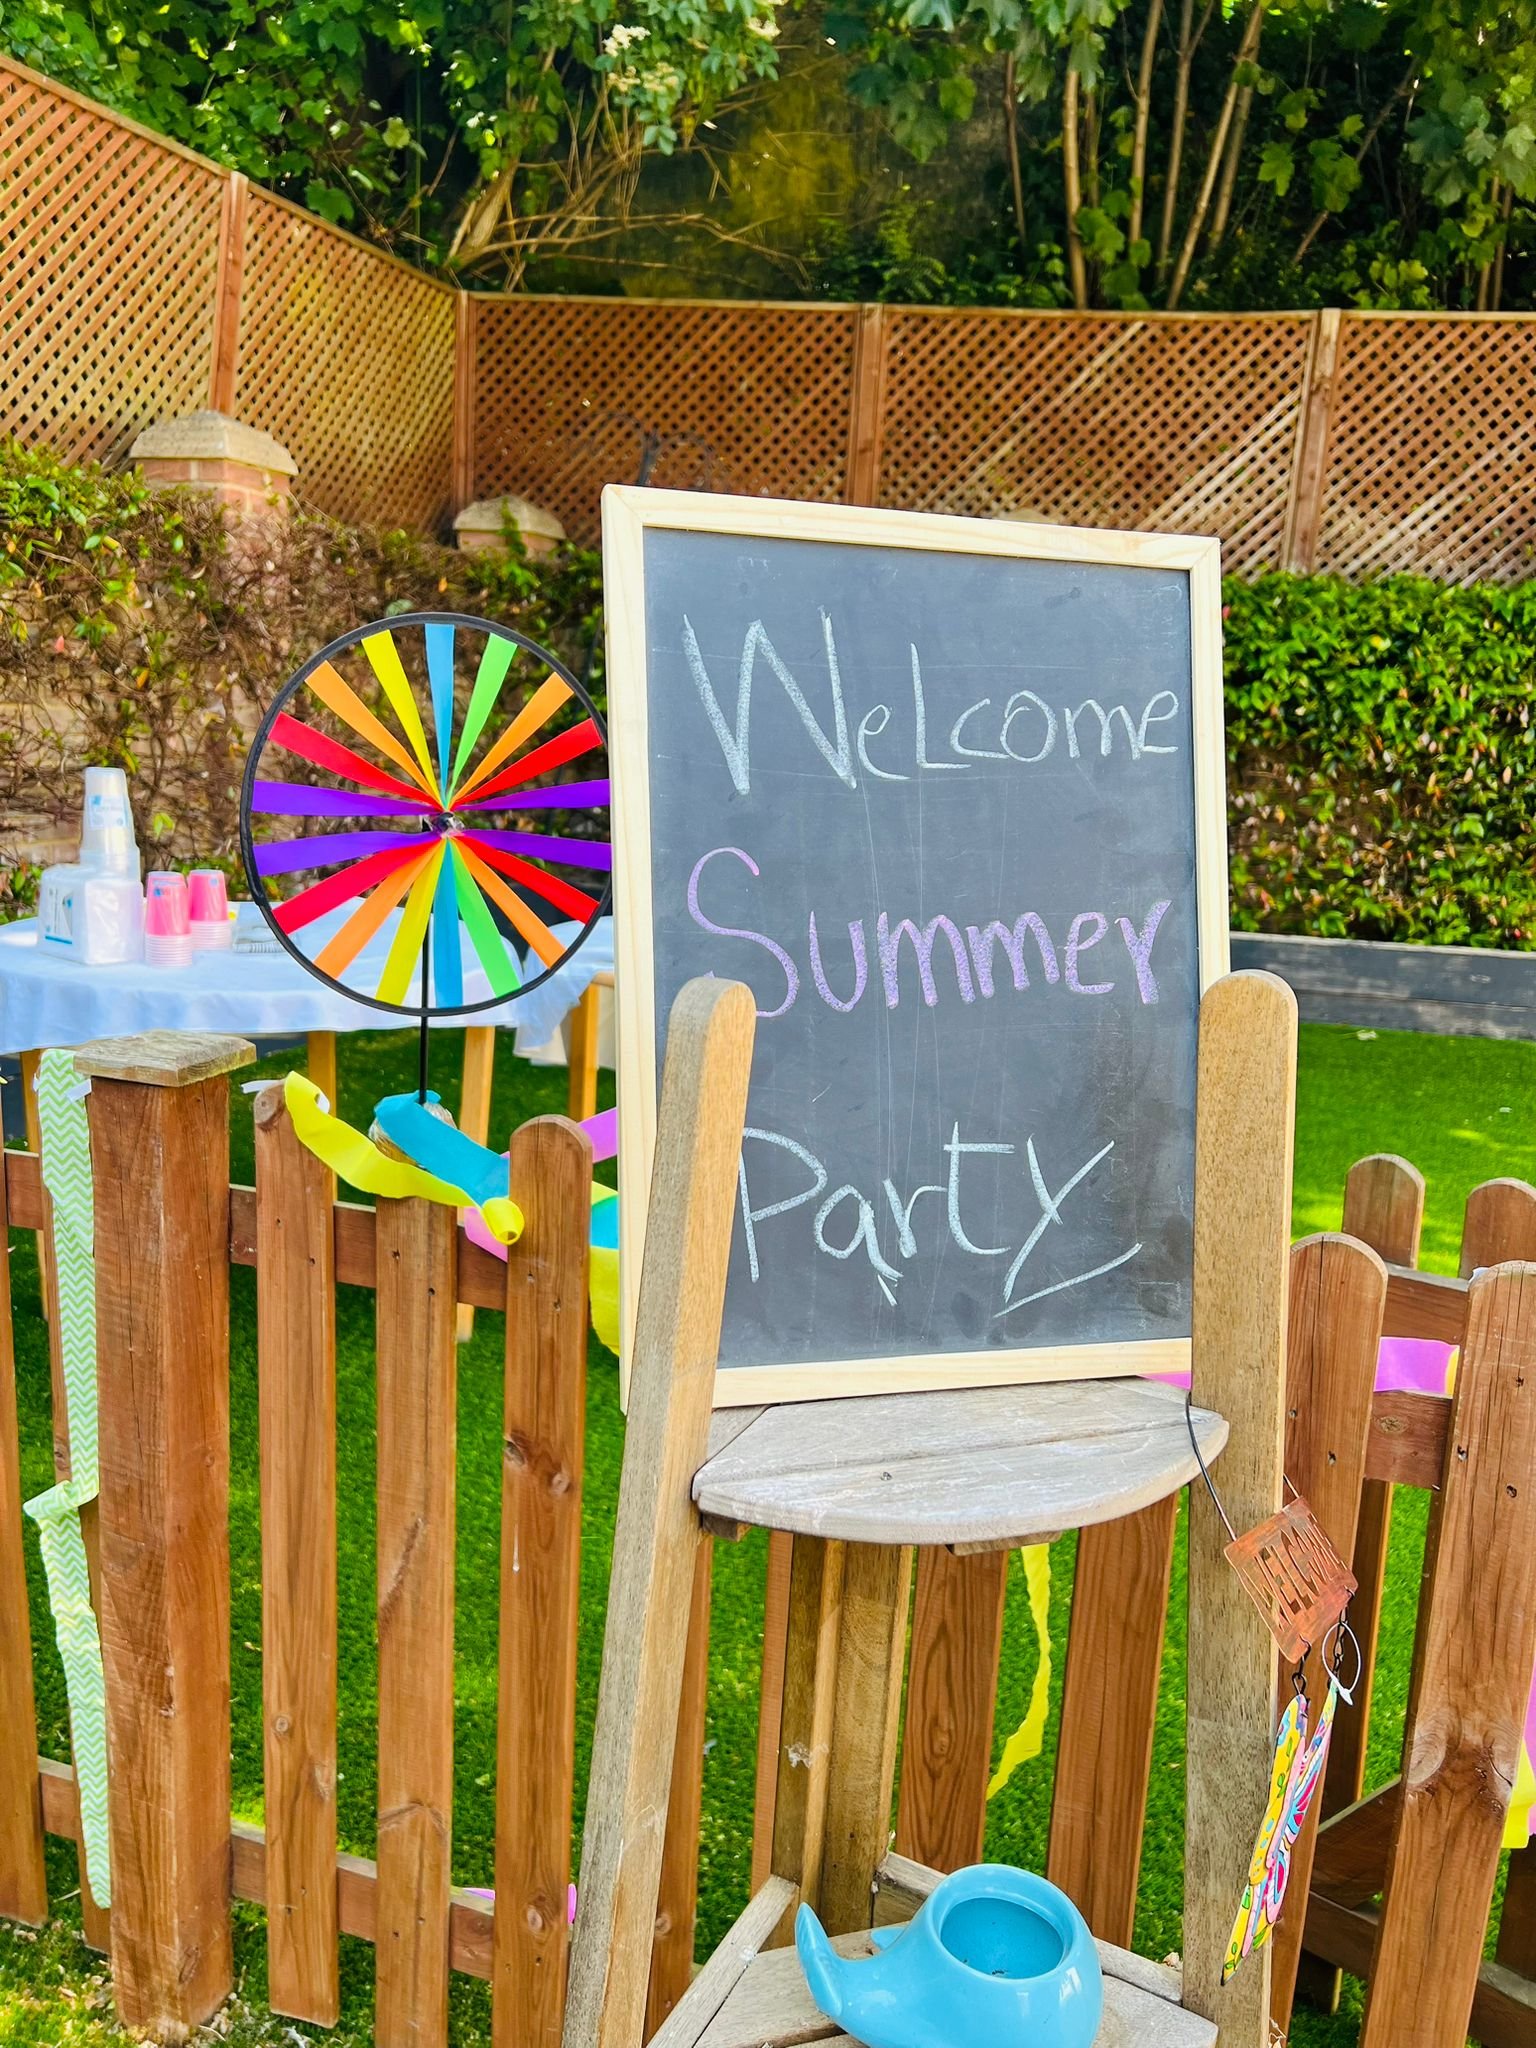 13th jUNE sUMMER PARTY